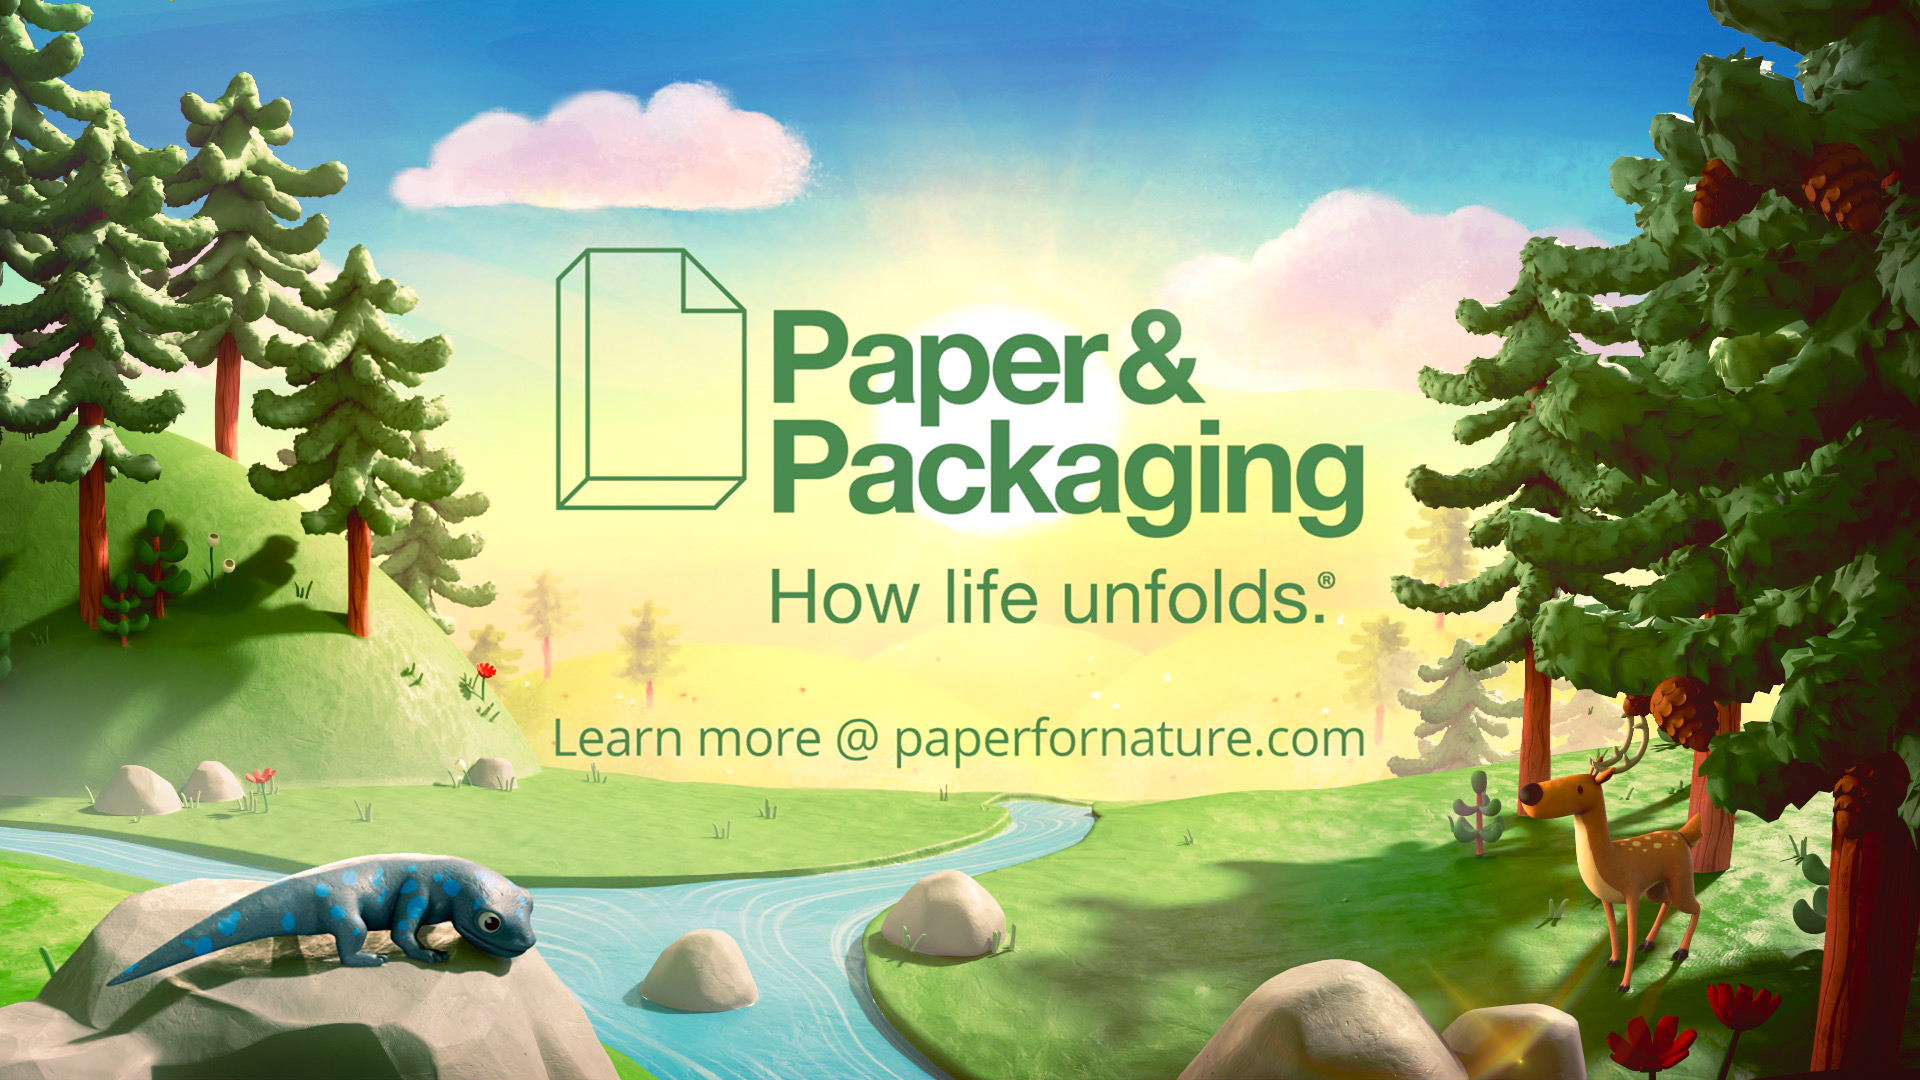 Boxes & Birds (Paper & Packaging)